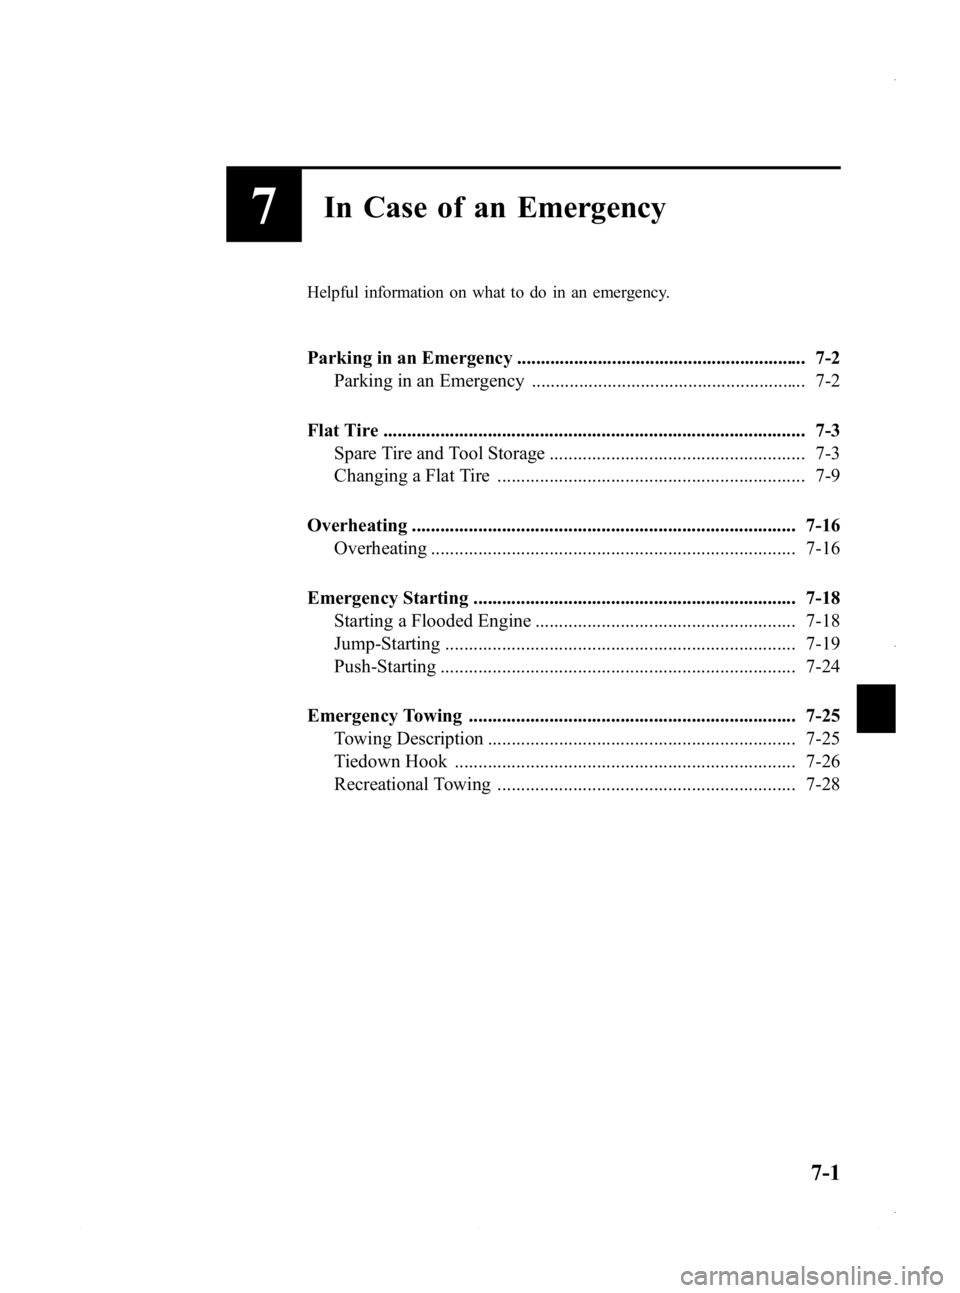 MAZDA MODEL 3 5-DOOR 2013  Owners Manual Black plate (437,1)
7In Case of an Emergency
Helpful information on what to do in an emergency.
Parking in an Emergency ............................................................. 7-2Parking in an E